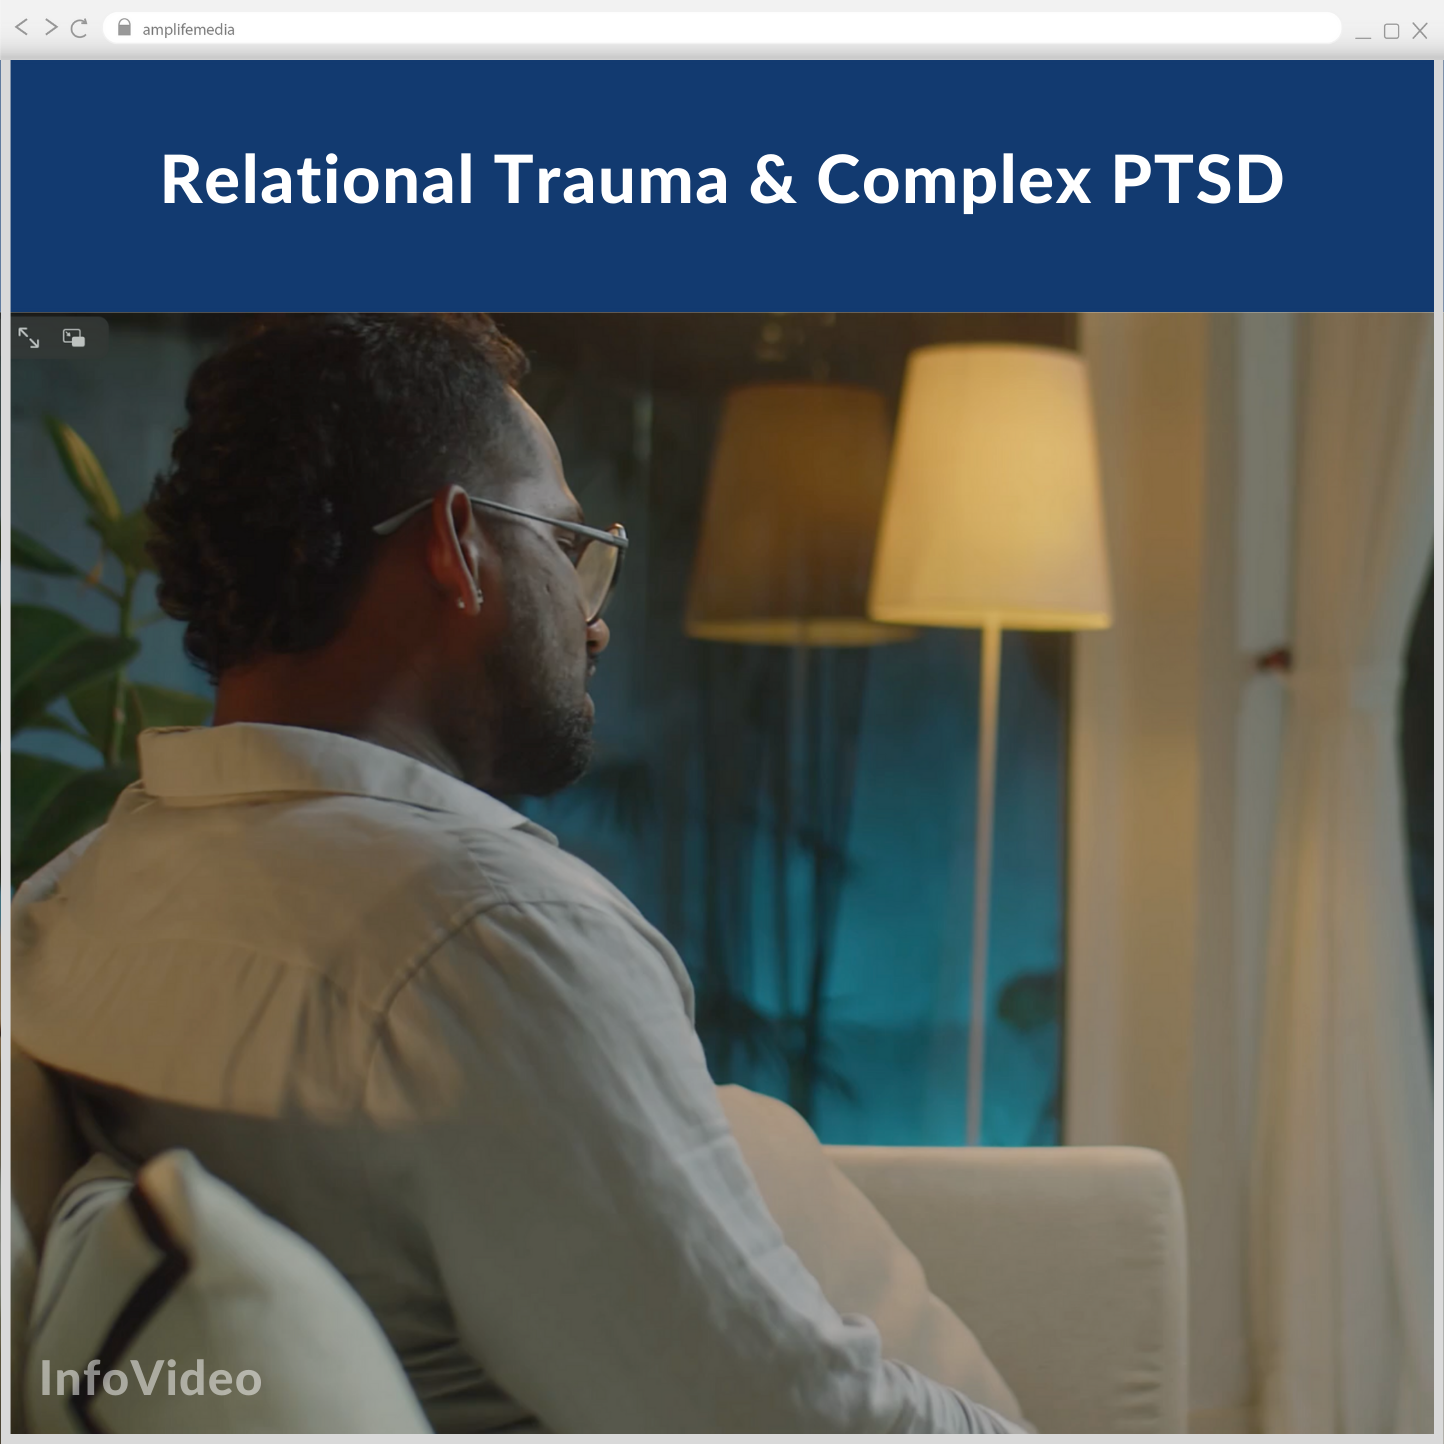 Subscription to Wellbeing Media: Relational Trauma & Complex PTSD IV 1123